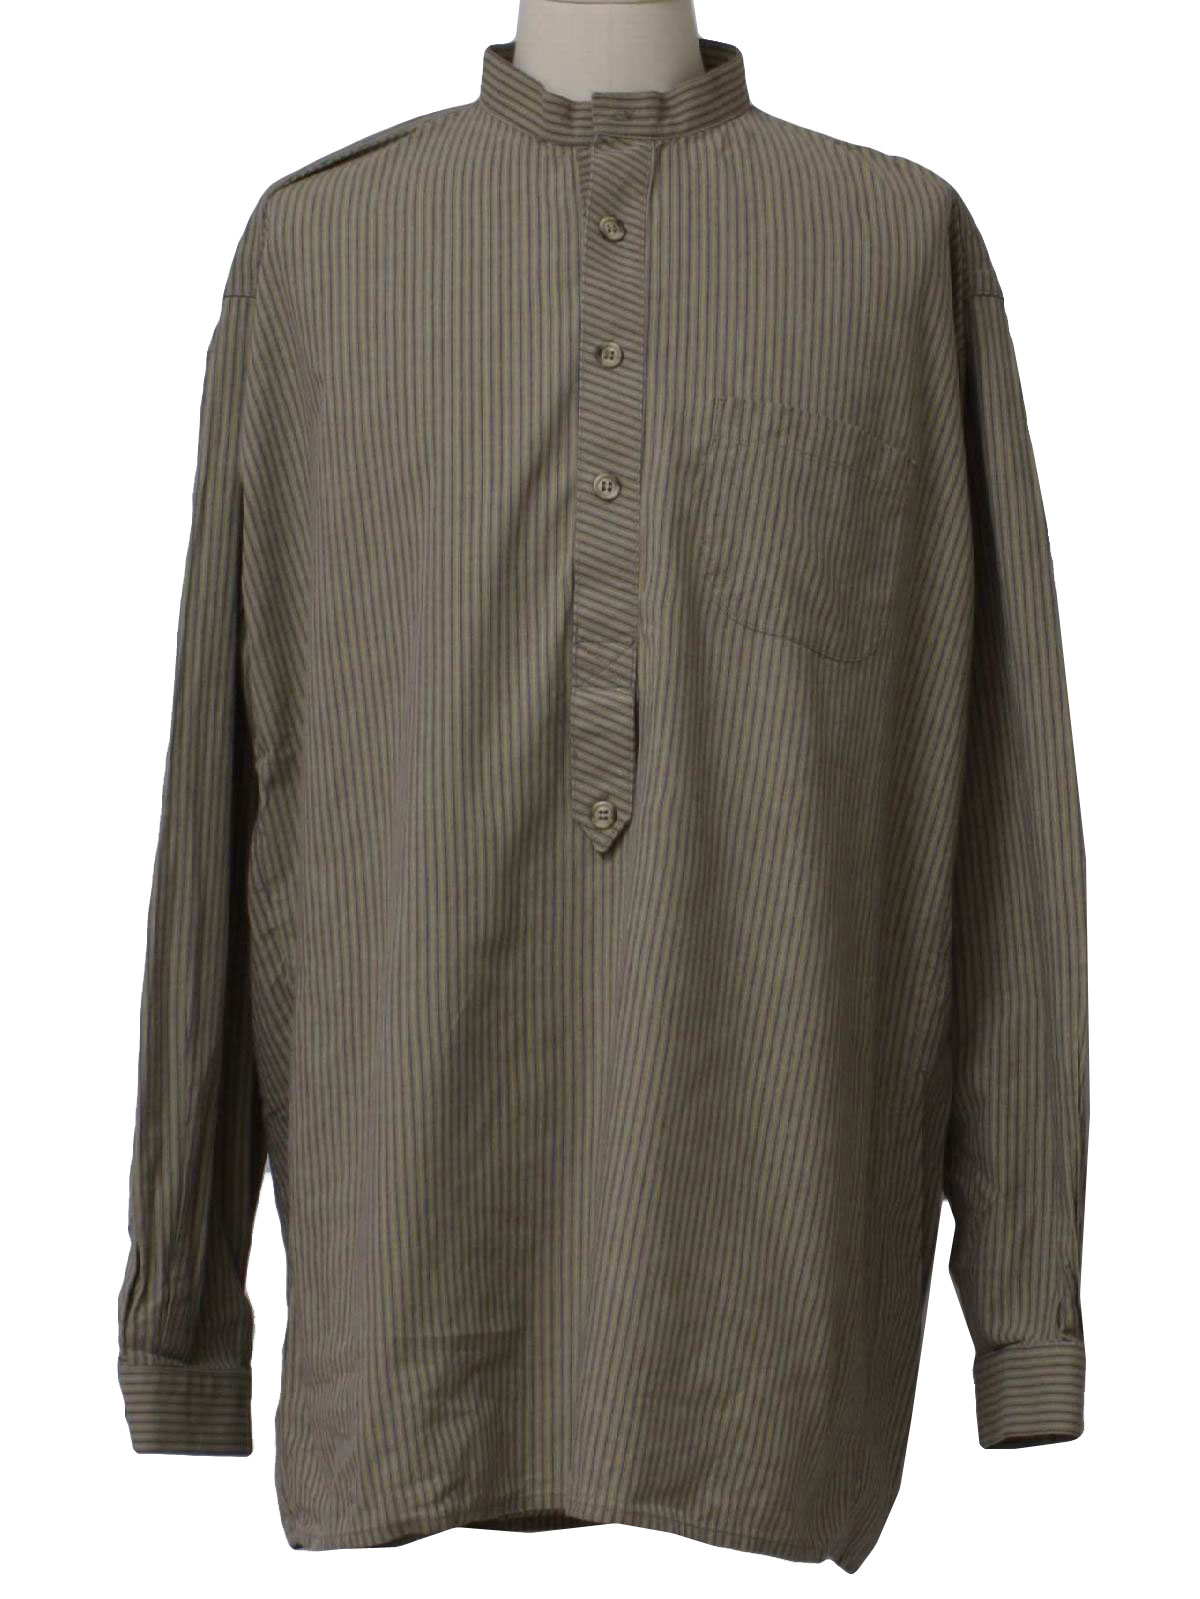 Western Shirt: 90s -Classic Old West Styles- Mens Late 1800s style ...